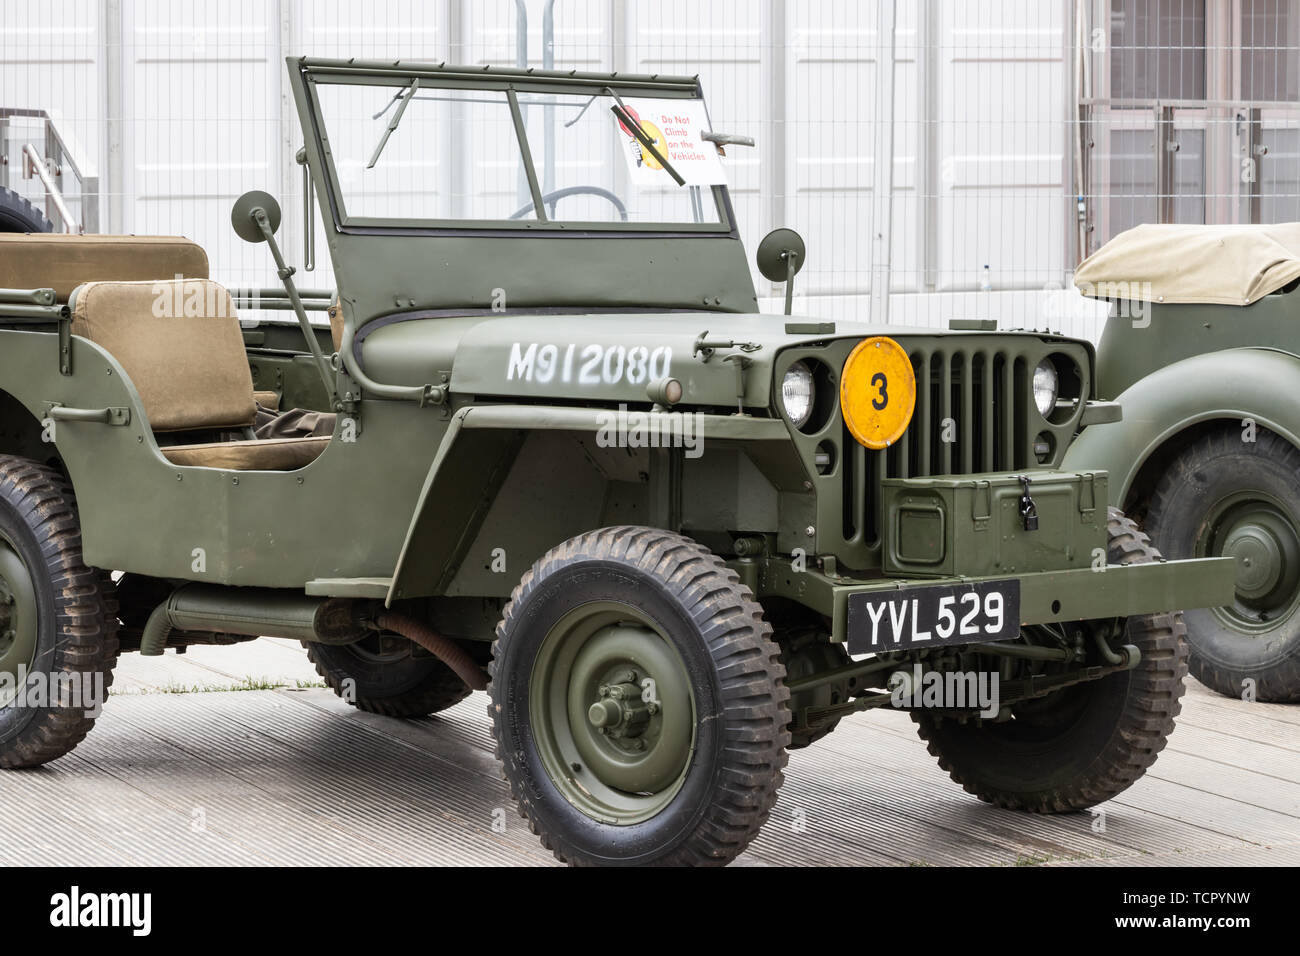 A vintage world war two jeep Stock Photo